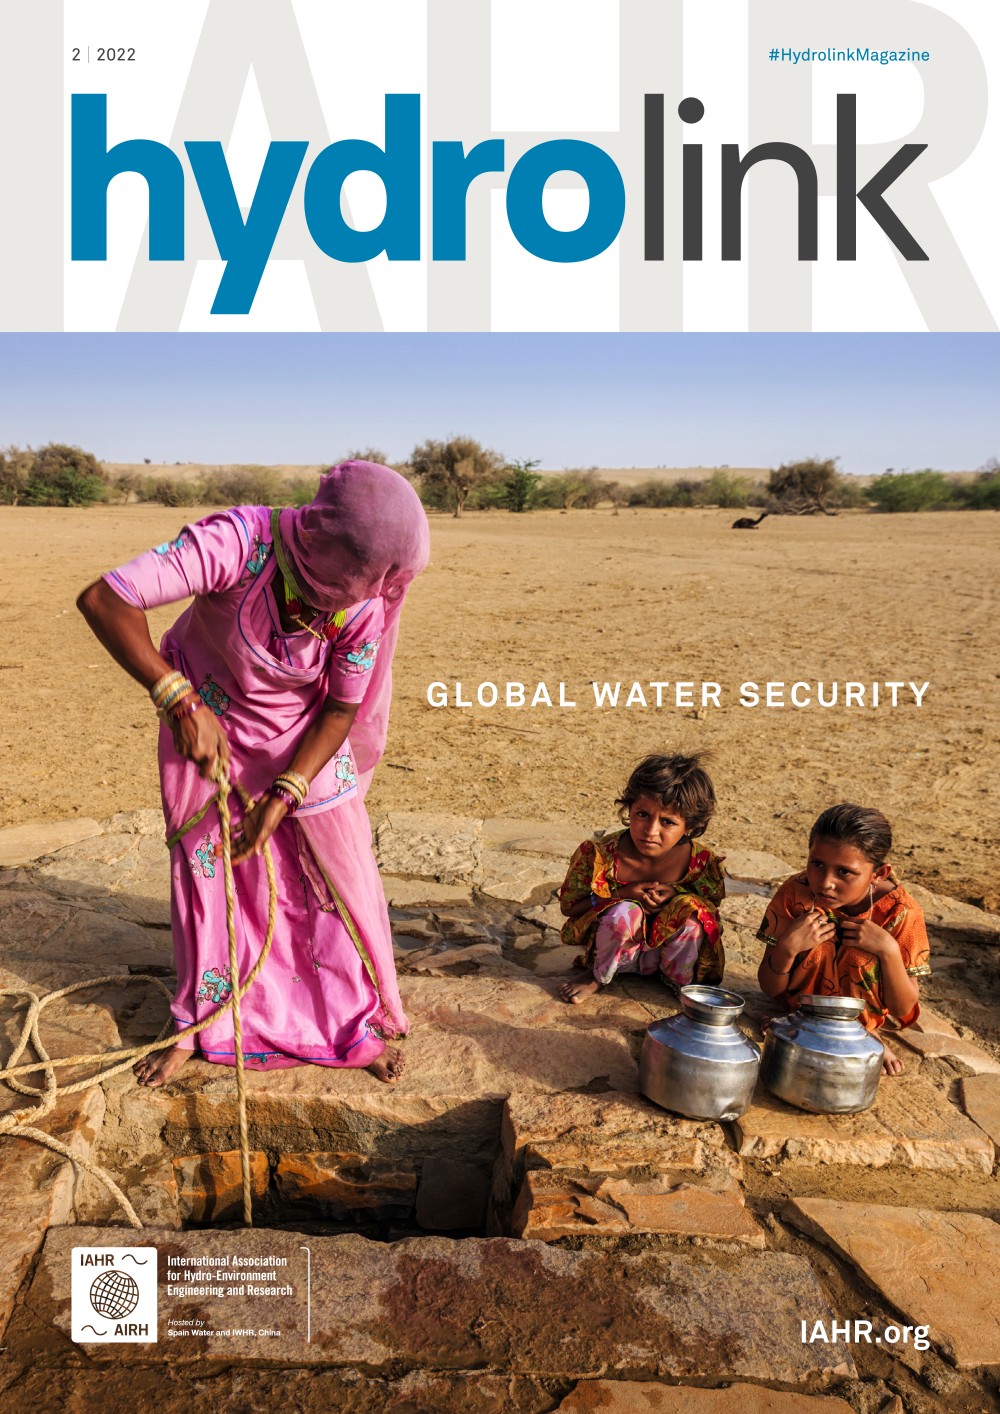 Hydrolink issue 2, 2022 Global Water Security